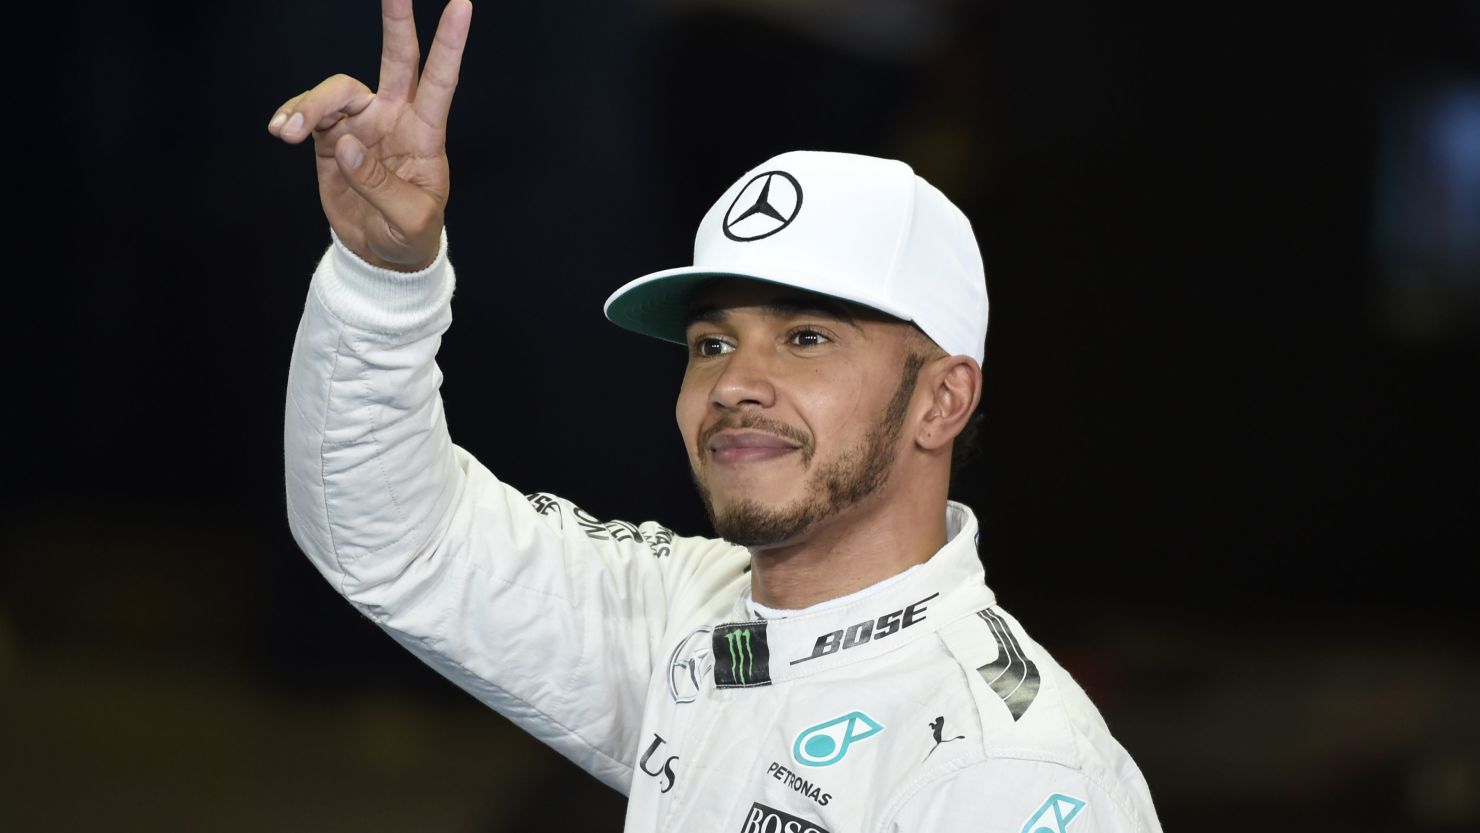 Lewis Hamilton is all smiles after taking pole position for the Abu Dhabi GP at Yas Marina.